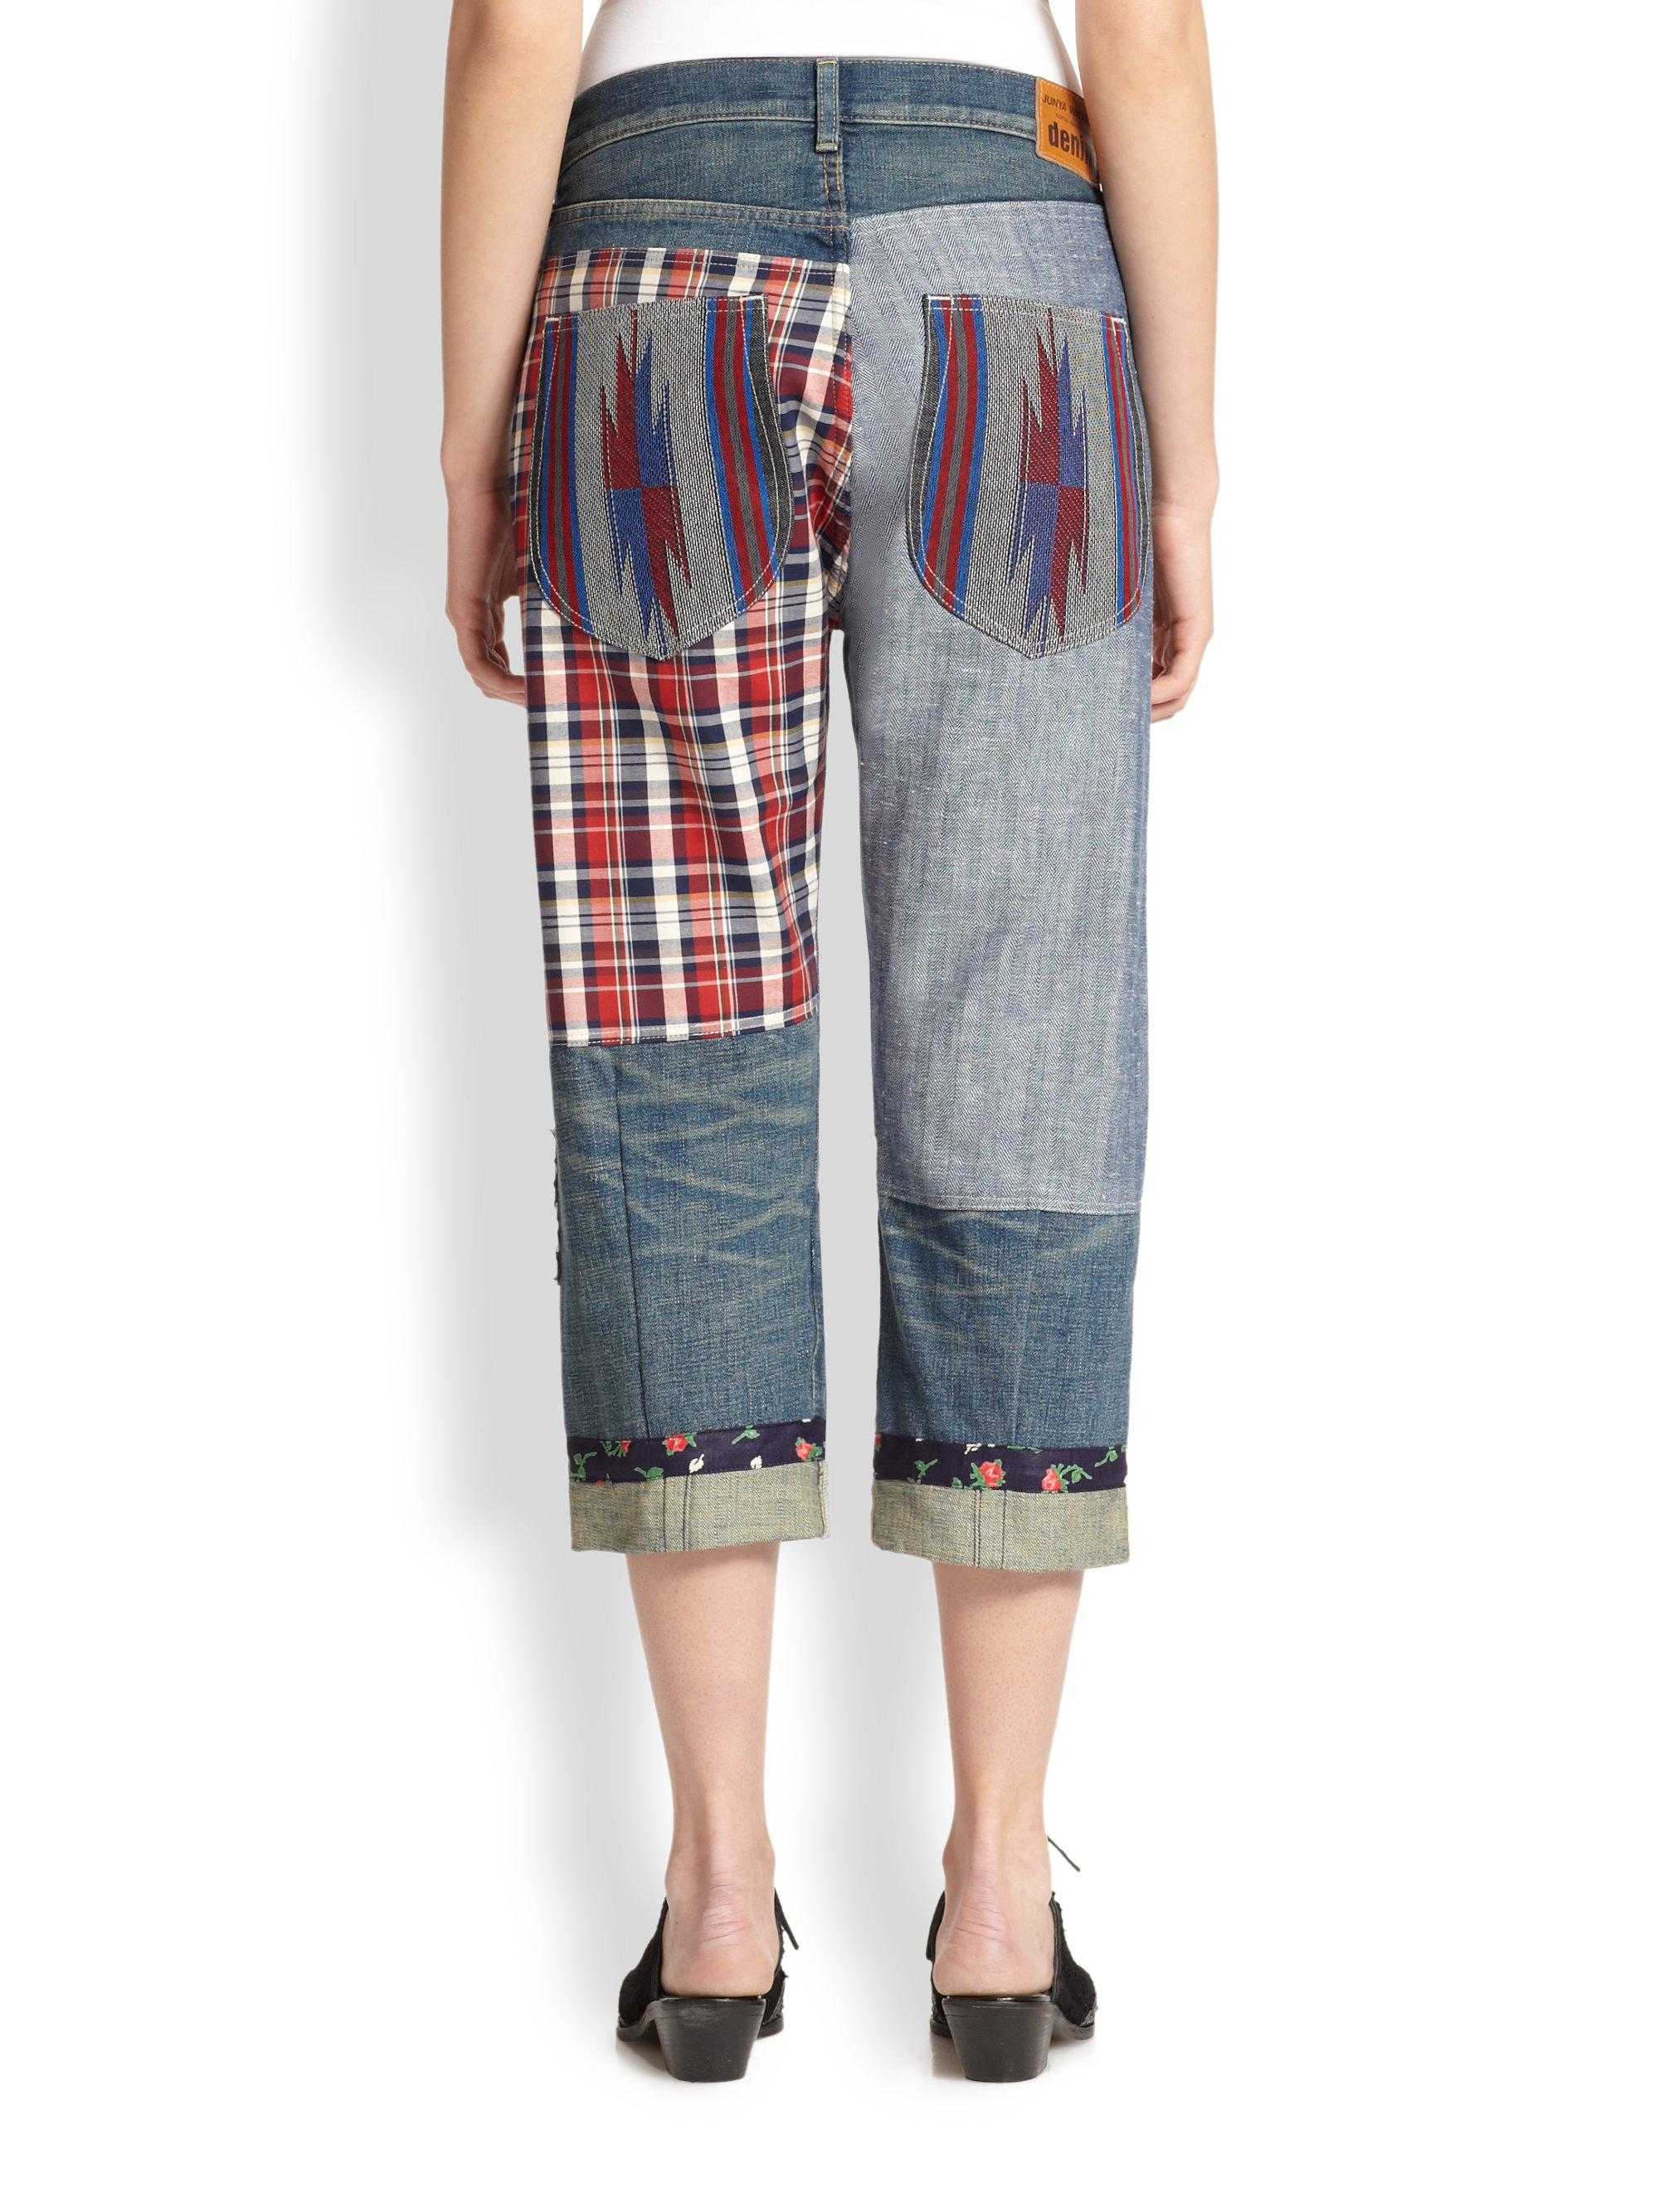 Lyst - Junya Watanabe Patchwork Jeans in Blue